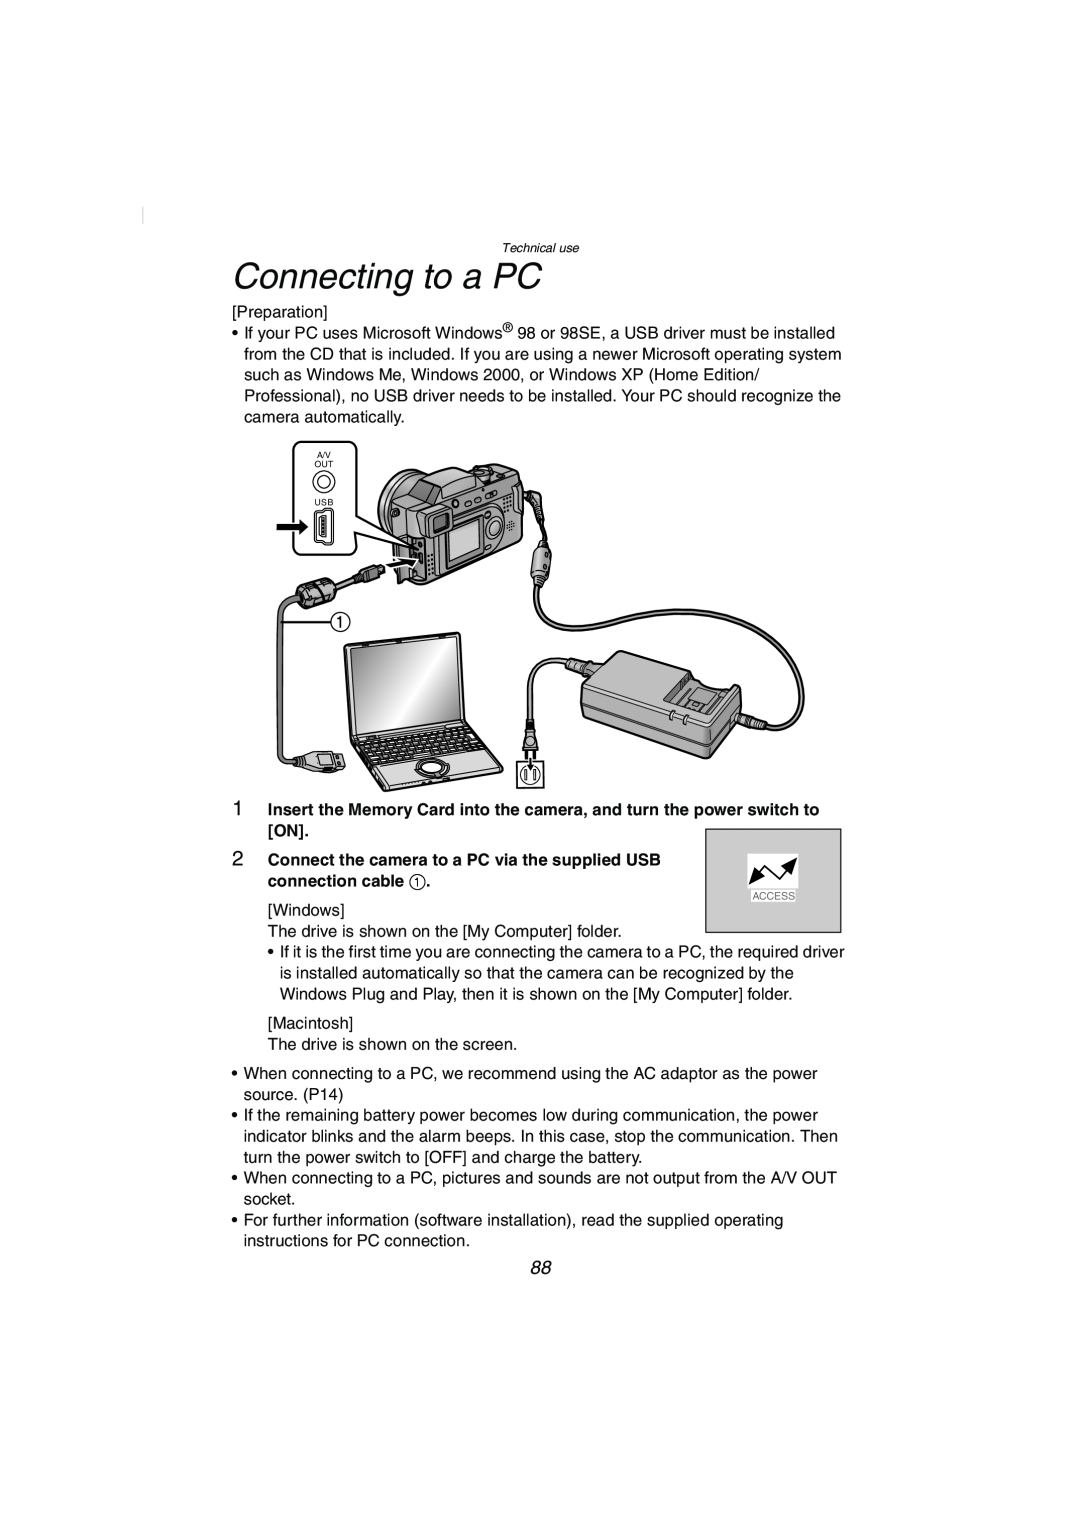 Panasonic DMC-FZ2PP Connecting to a PC, Connect the camera to a PC via the supplied USB connection cable 